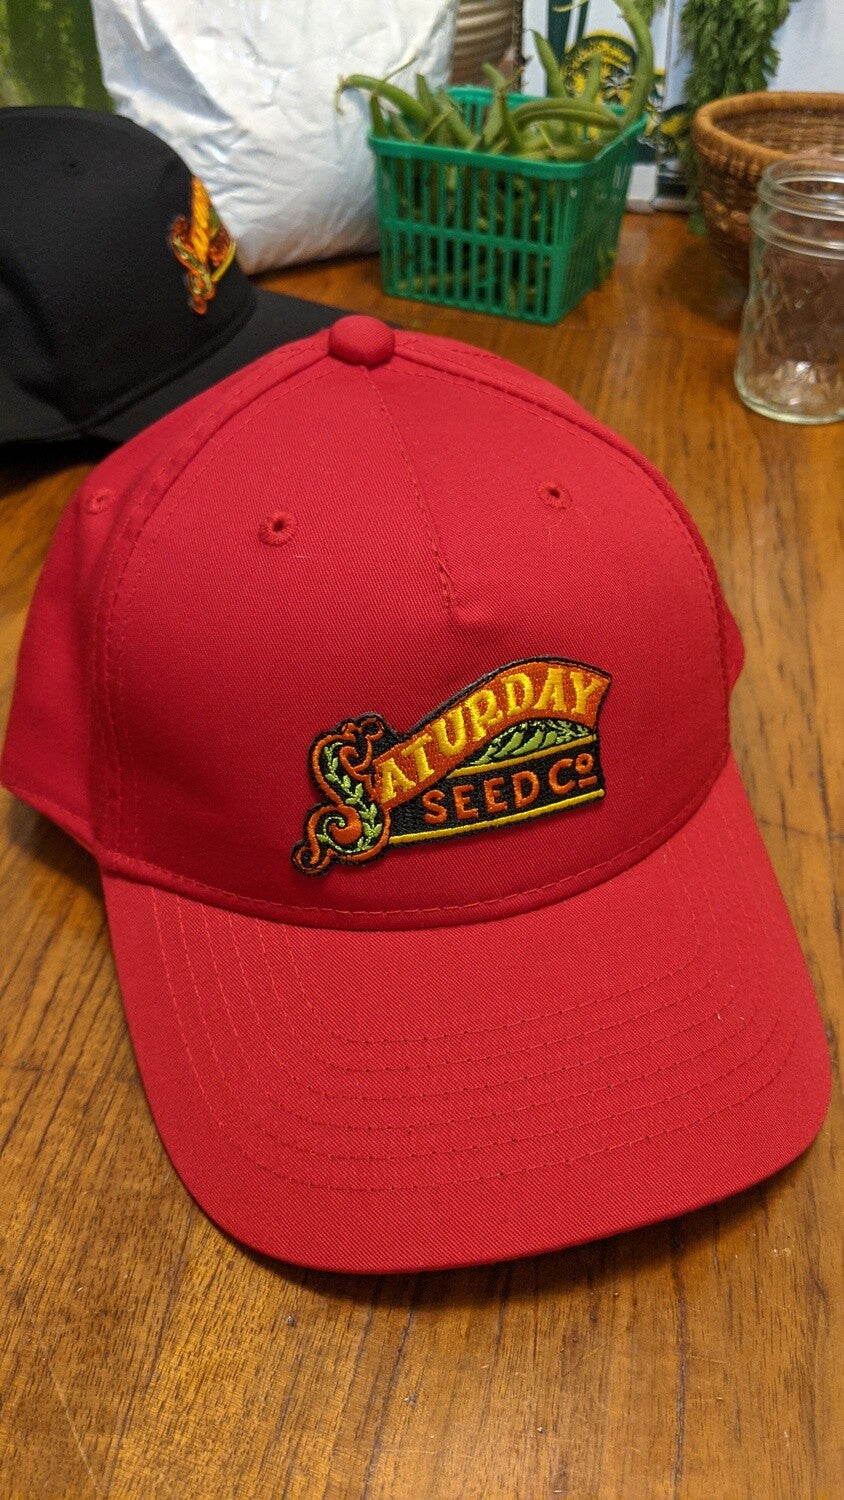 Red Saturday Seed Co. snap back hat